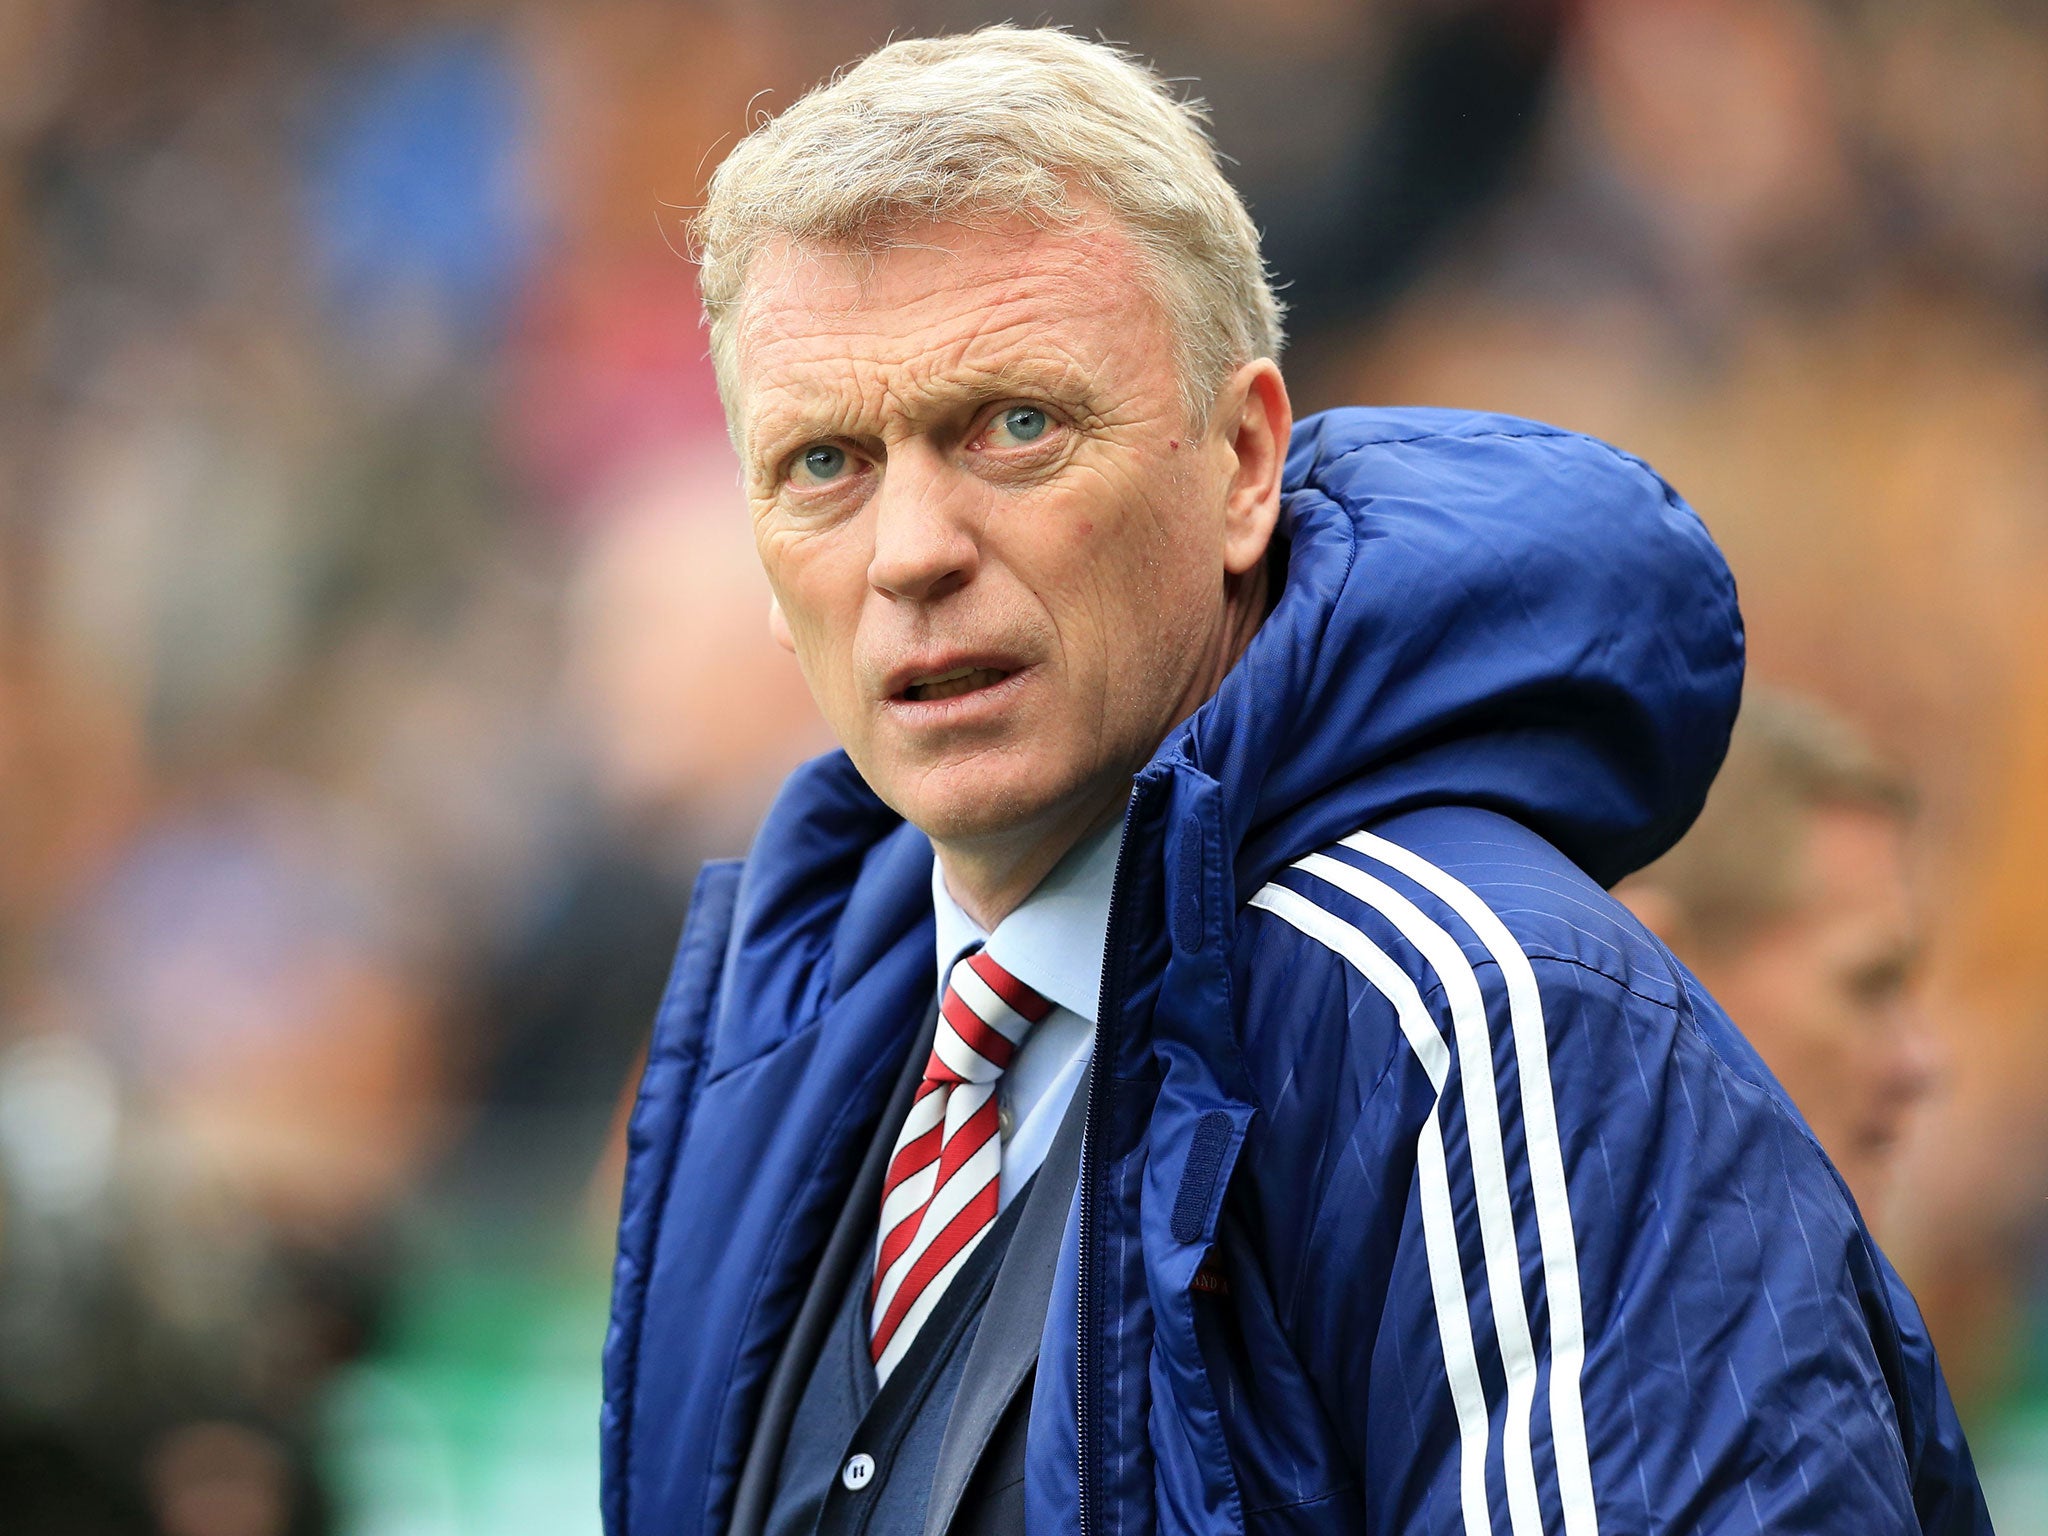 David Moyes picked up Sunderland's first win in 11 matches